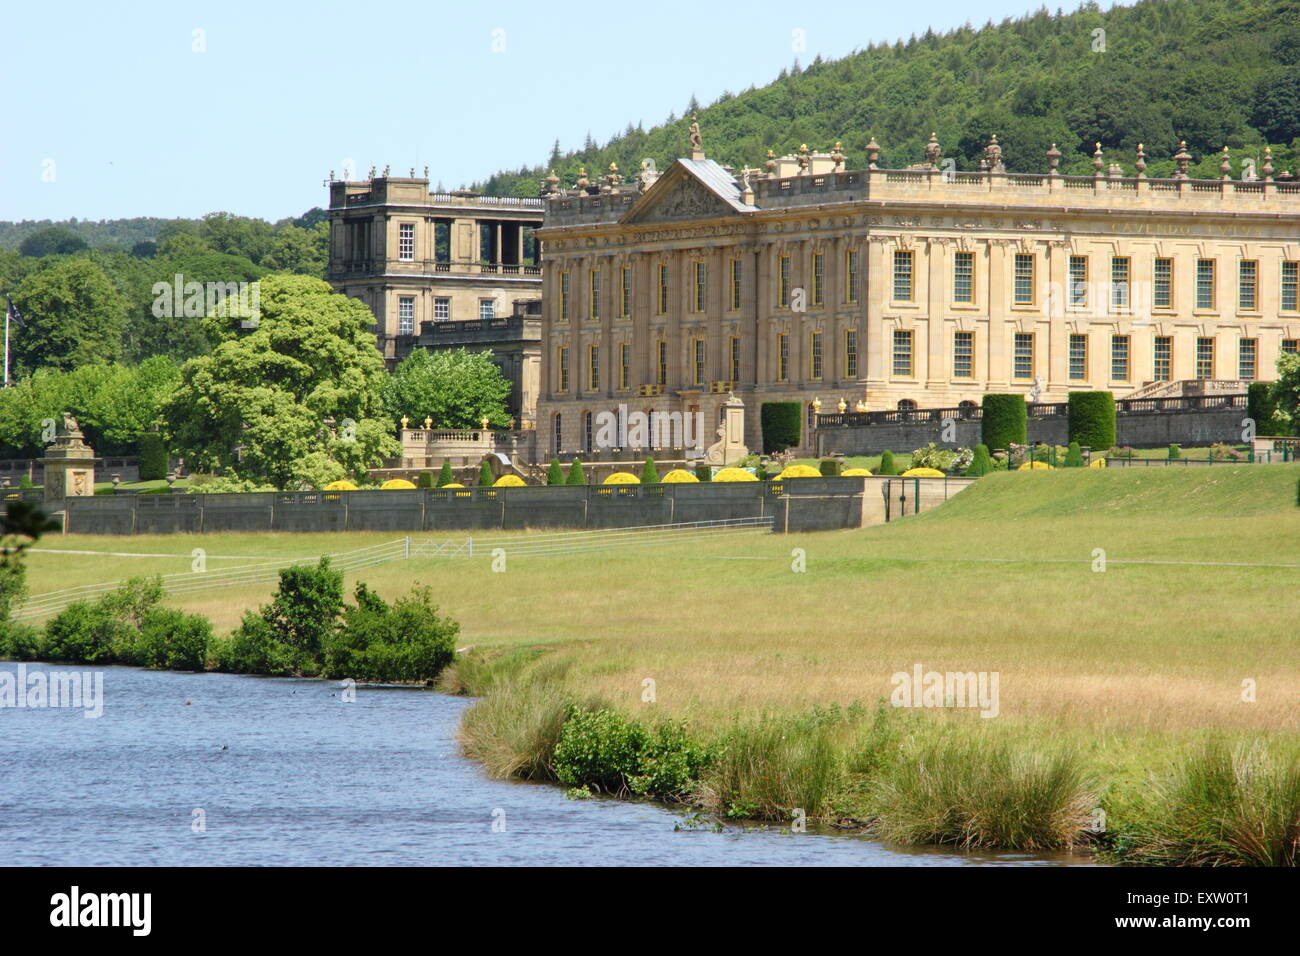 Chatsworth House seen from the banks of the River Derwent on a glorious summer day, Peak District, Derbyshire UK Stock Photo